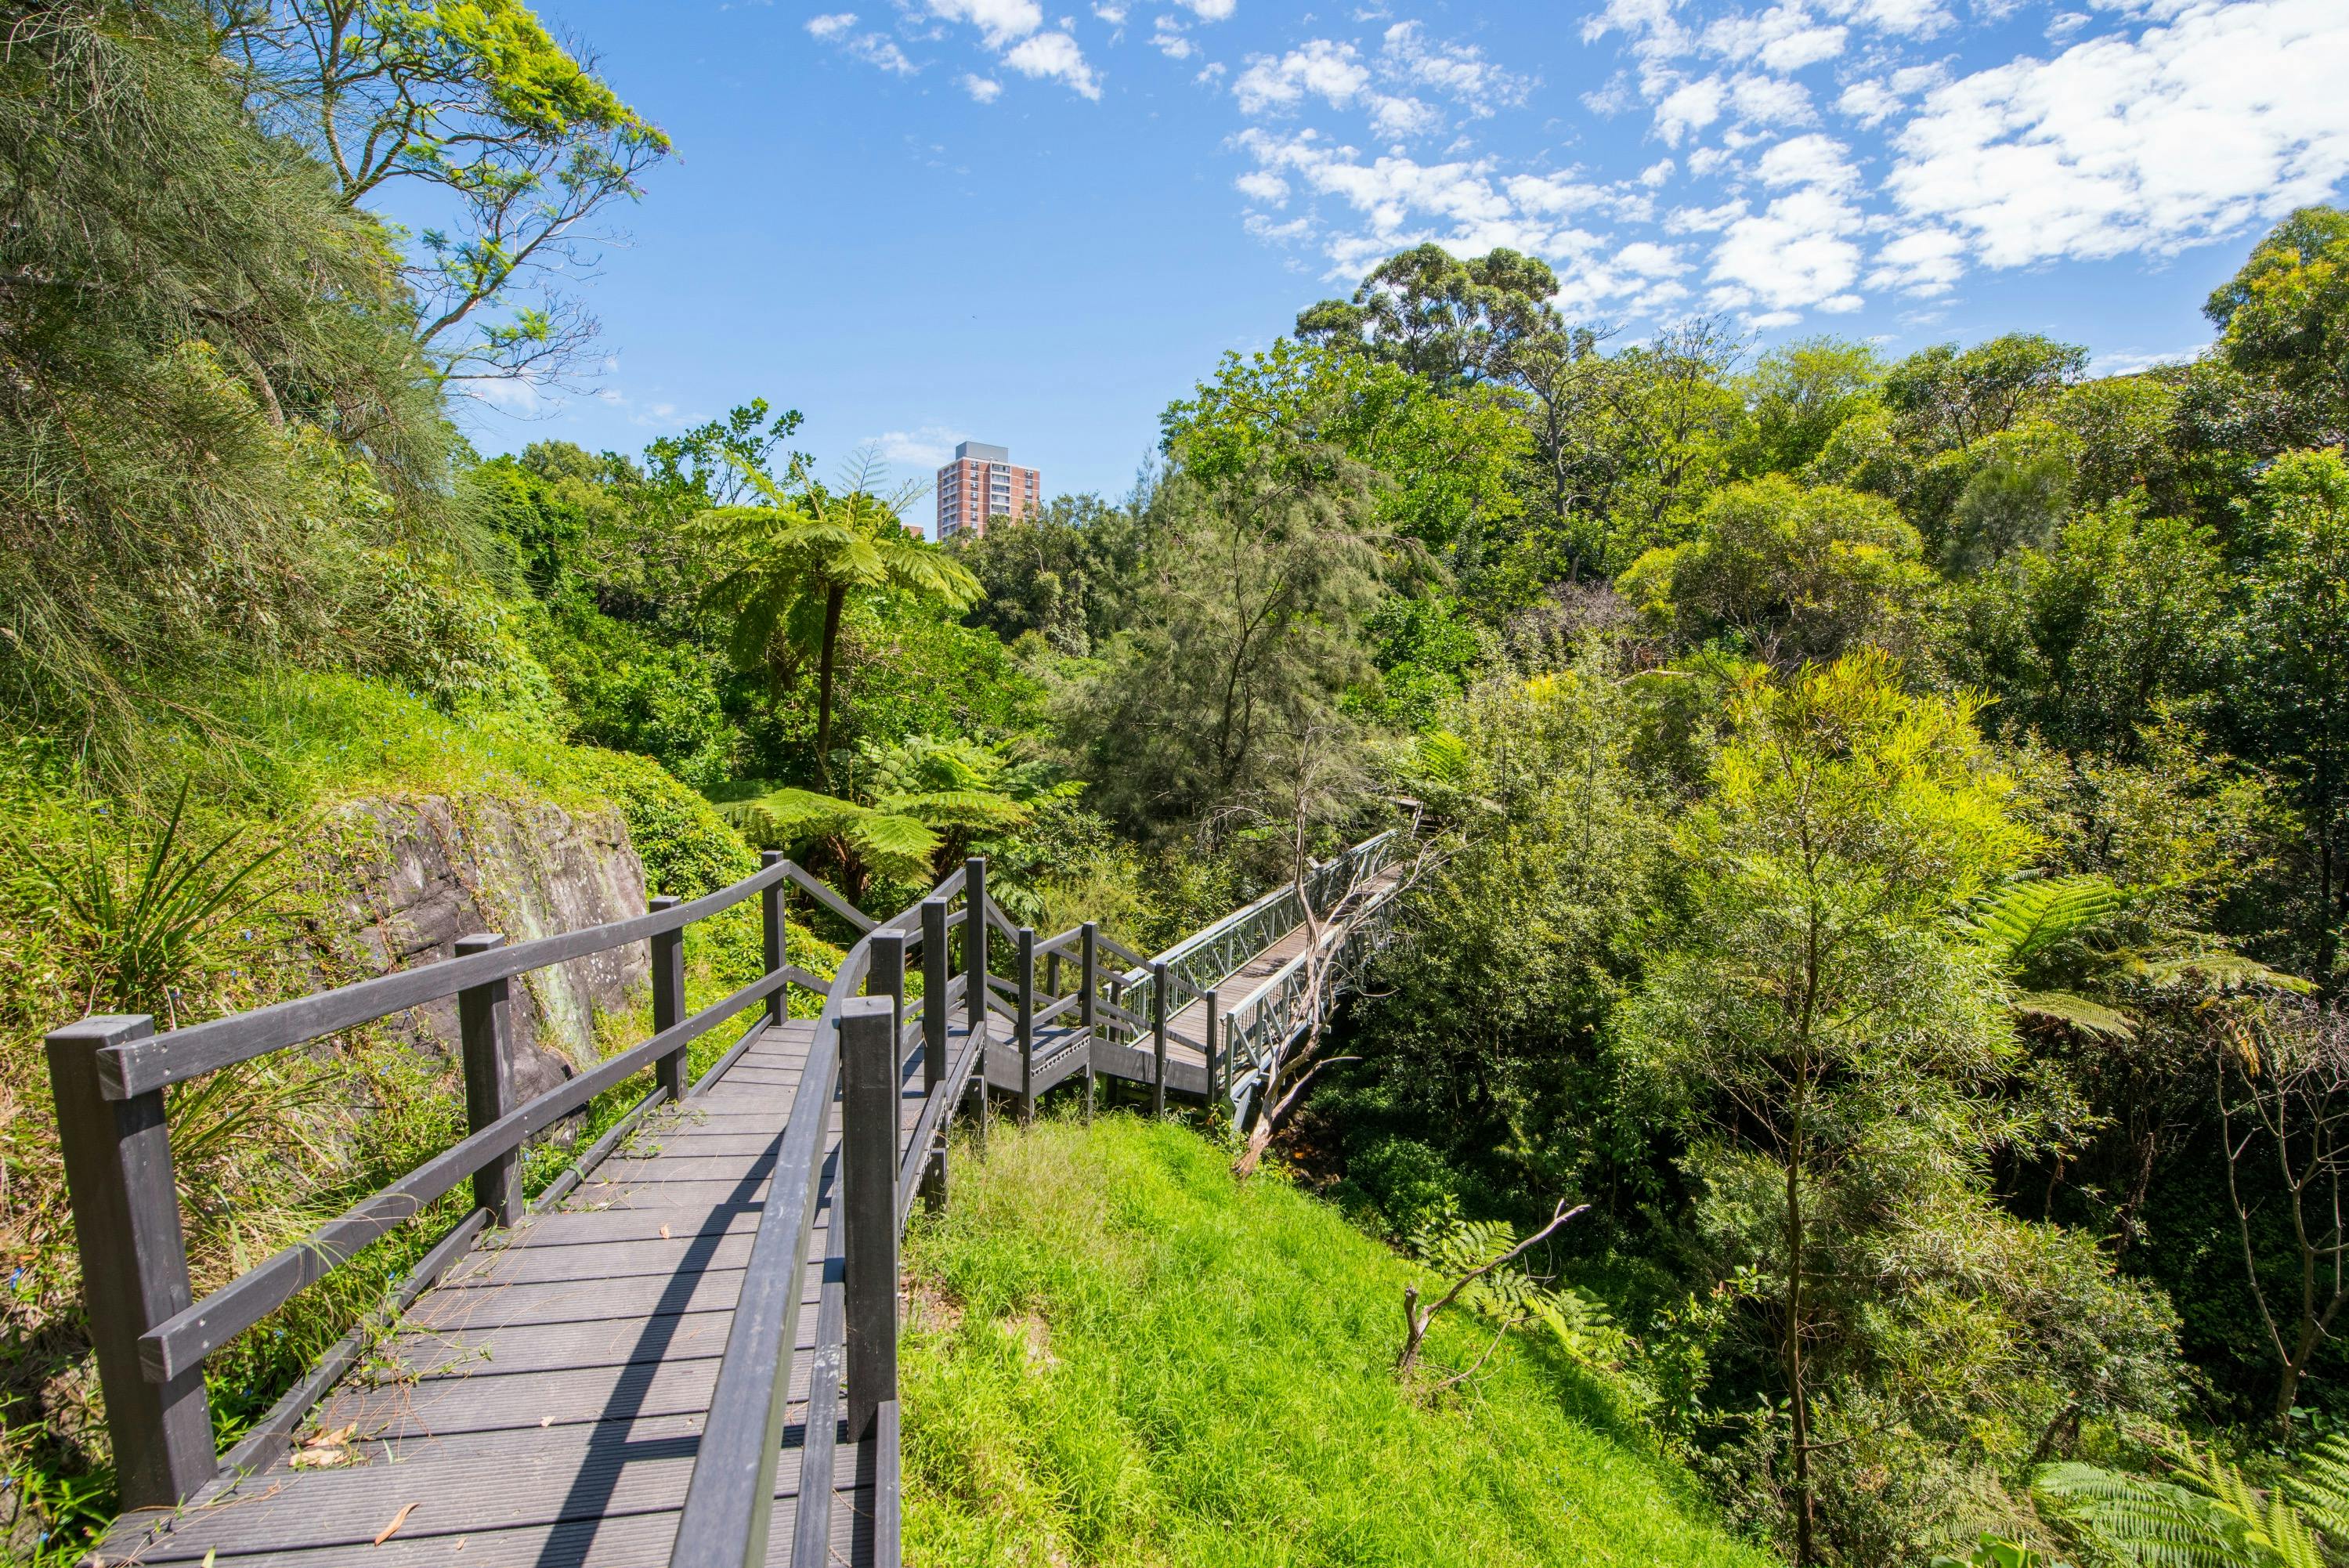 Completion of the boardwalk upgrade at Fred Hollows Reserve, Randwick.